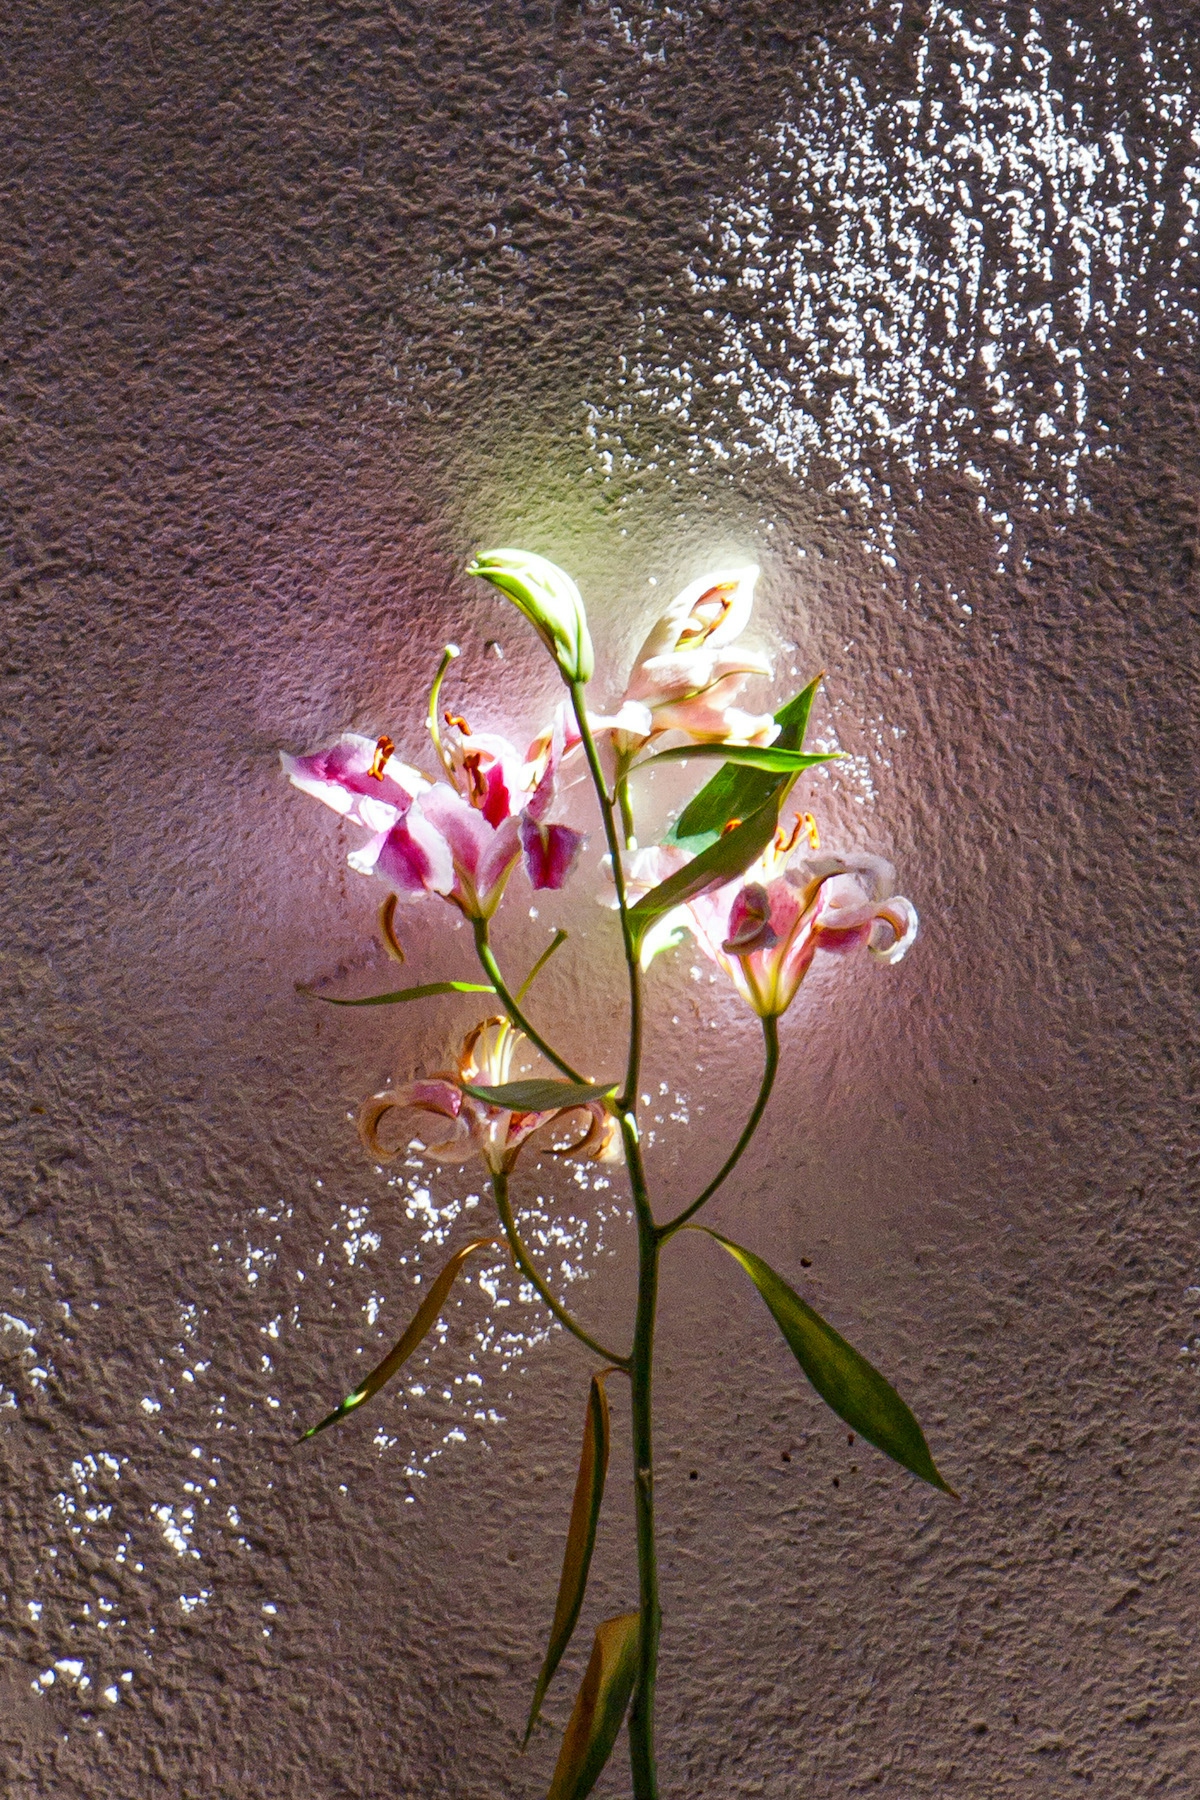 Pink and white flowers glow in ray of sunlight